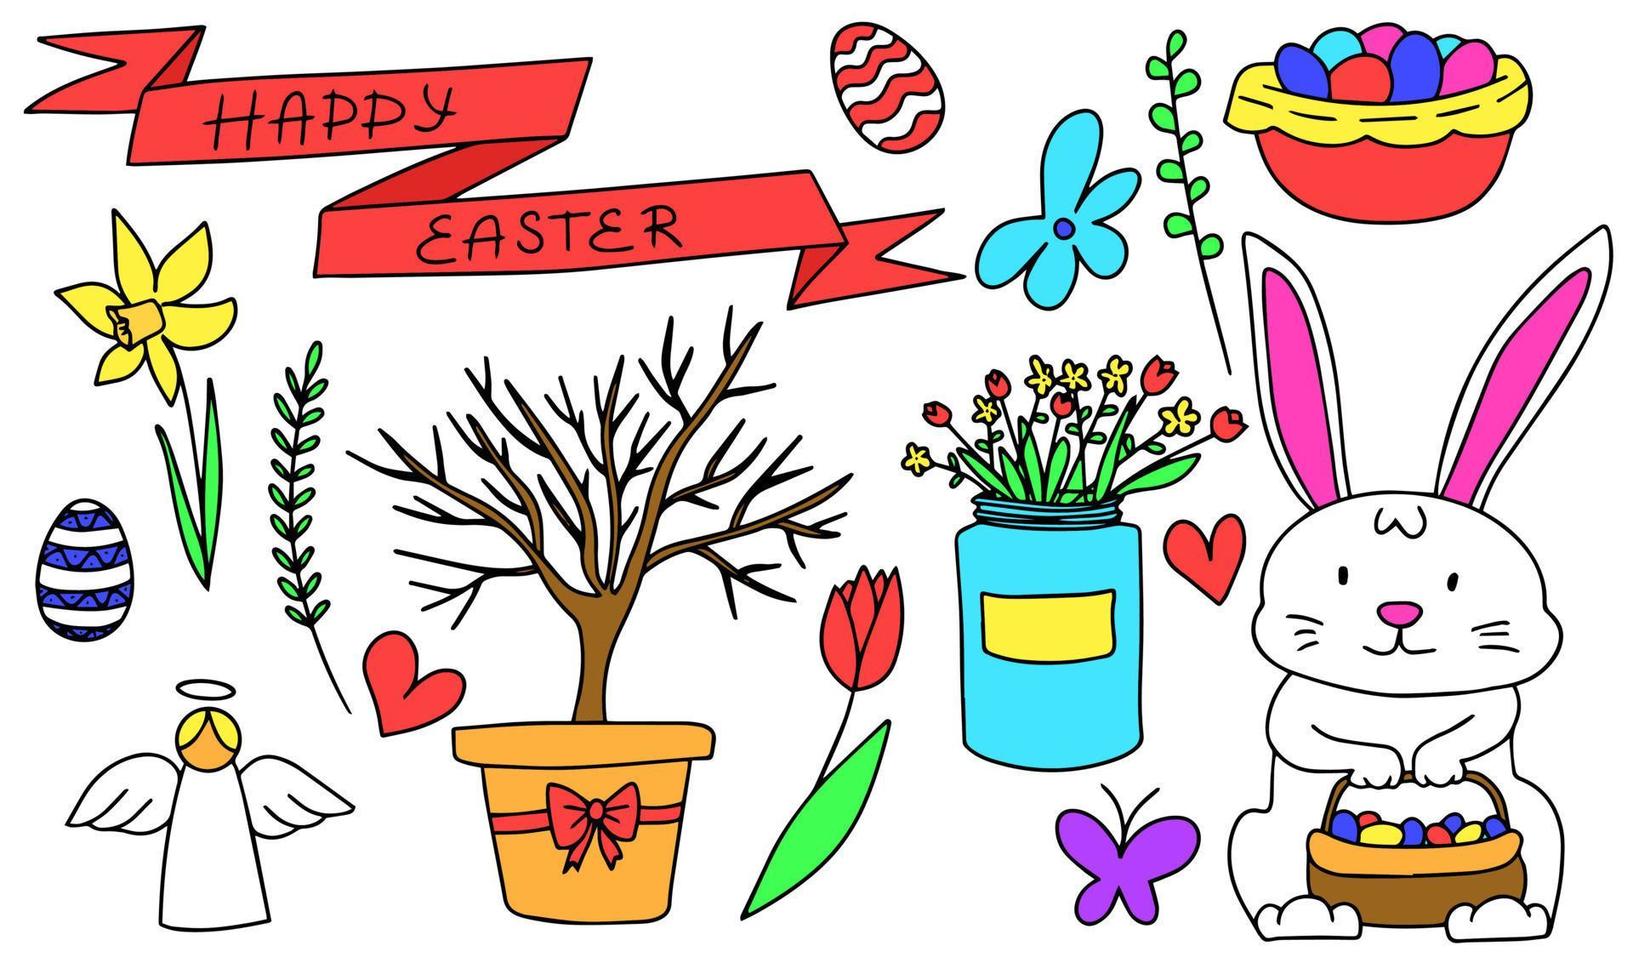 Happy Easter symbols in doodle style. Bunny, eggs, flowers. Vector illustration.